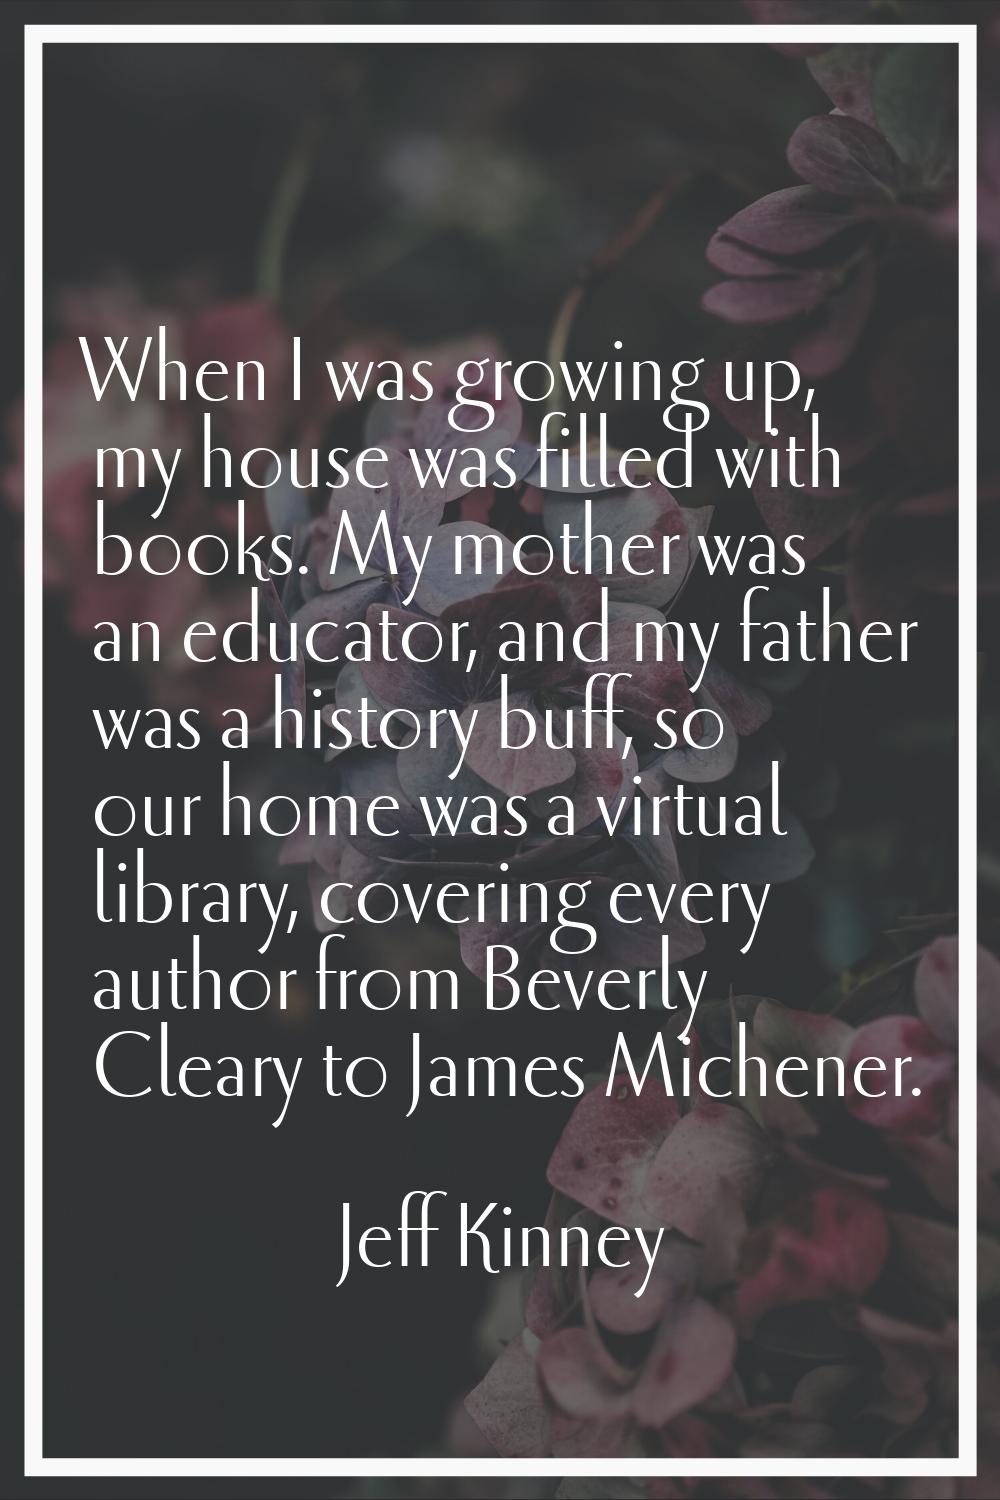 When I was growing up, my house was filled with books. My mother was an educator, and my father was